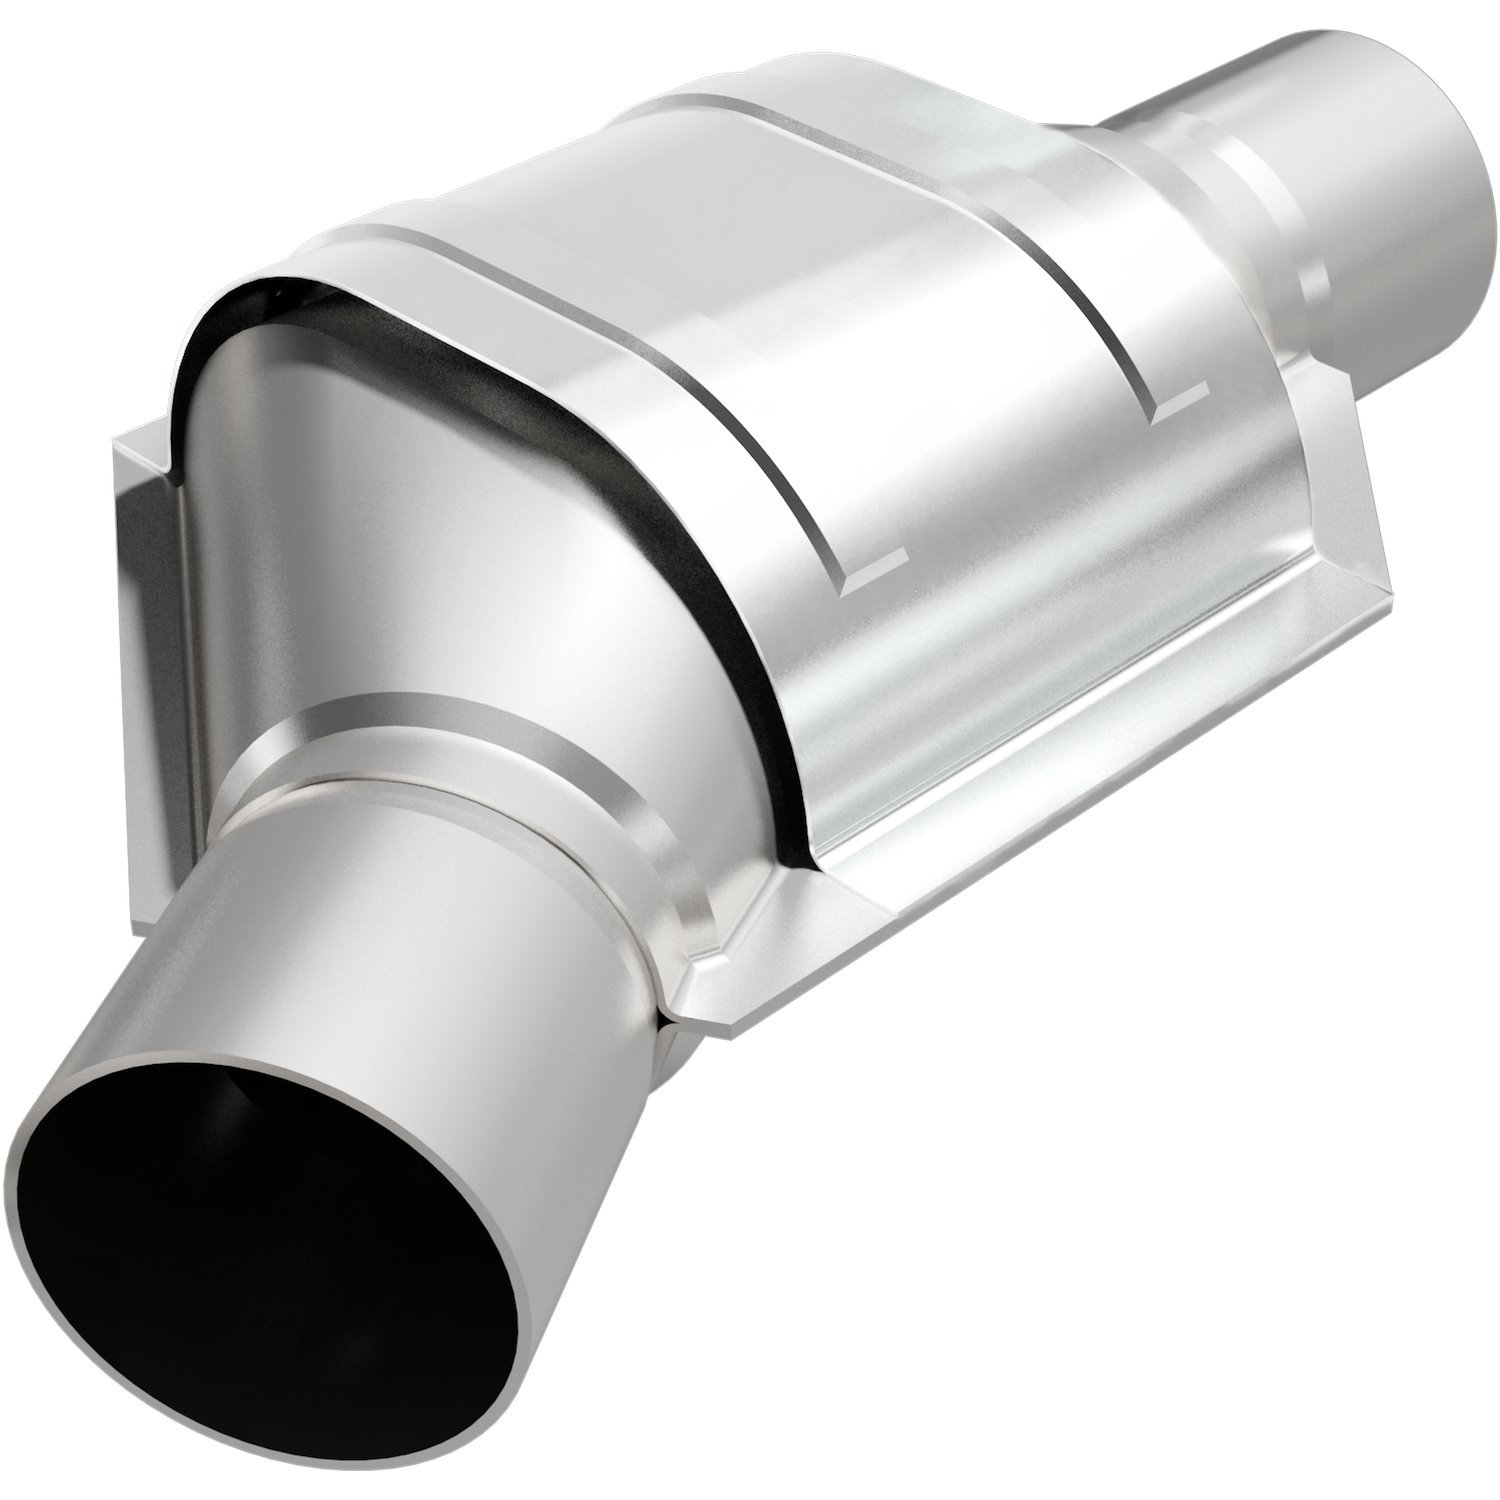 OBD-II 49-State Universal Catalytic Converter Body Shape: Angled